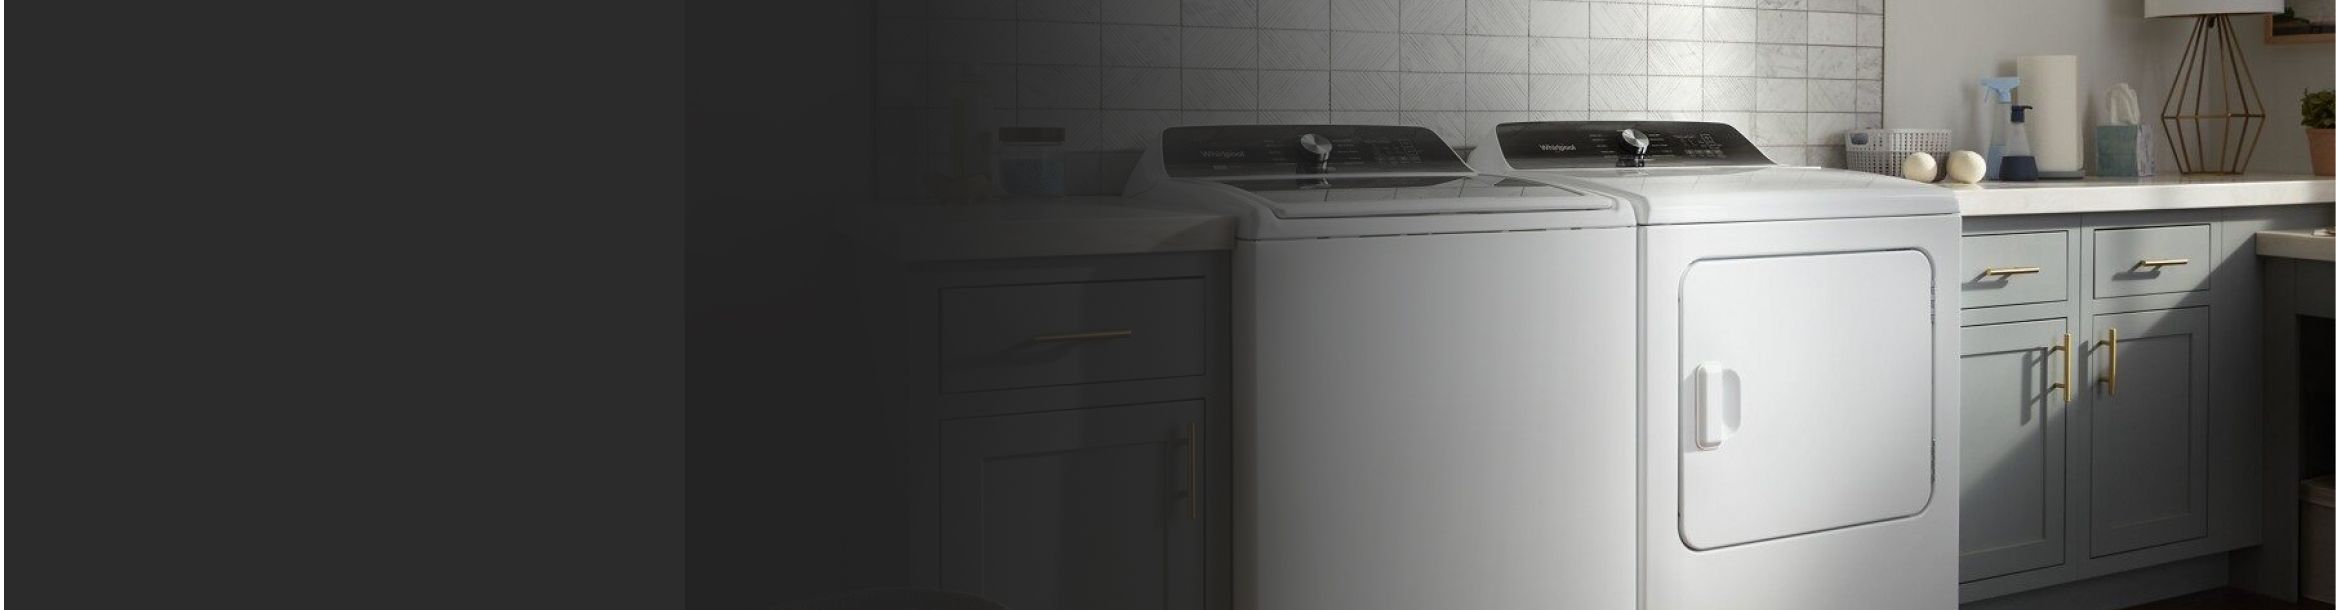 A white washer and dryer pair in a laundry room